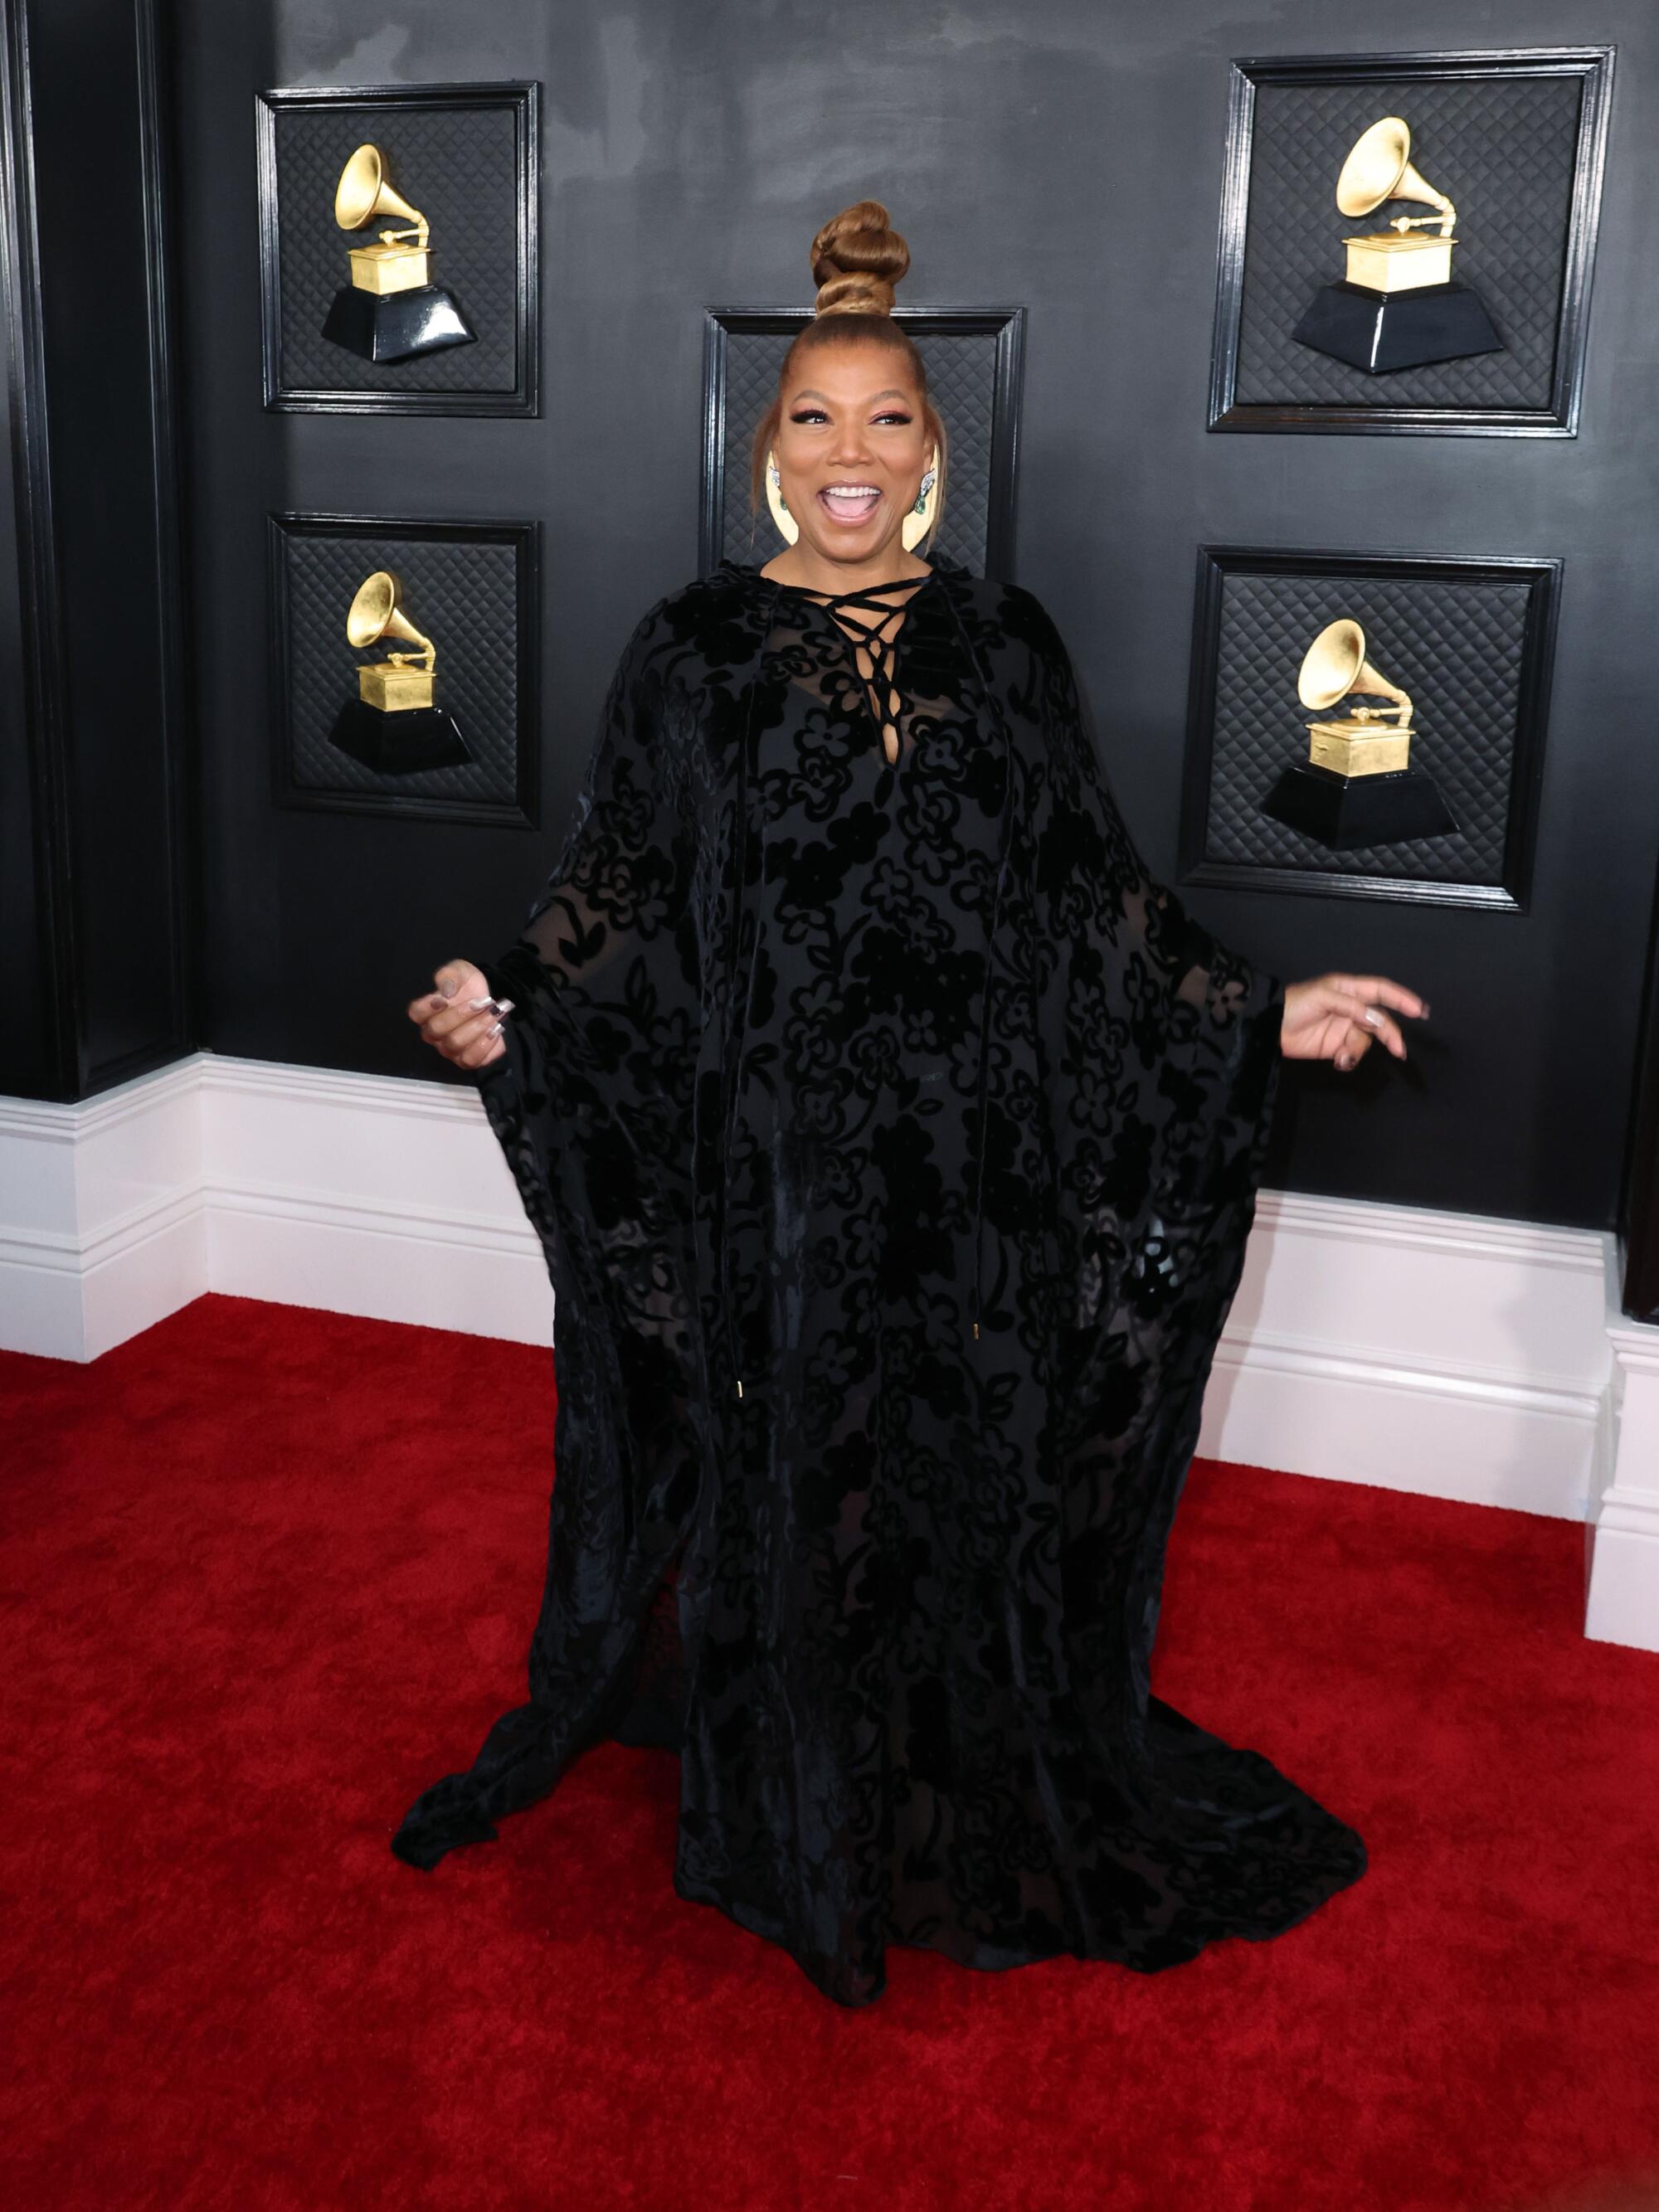 Queen Latifah at the 65th Grammy Awards.